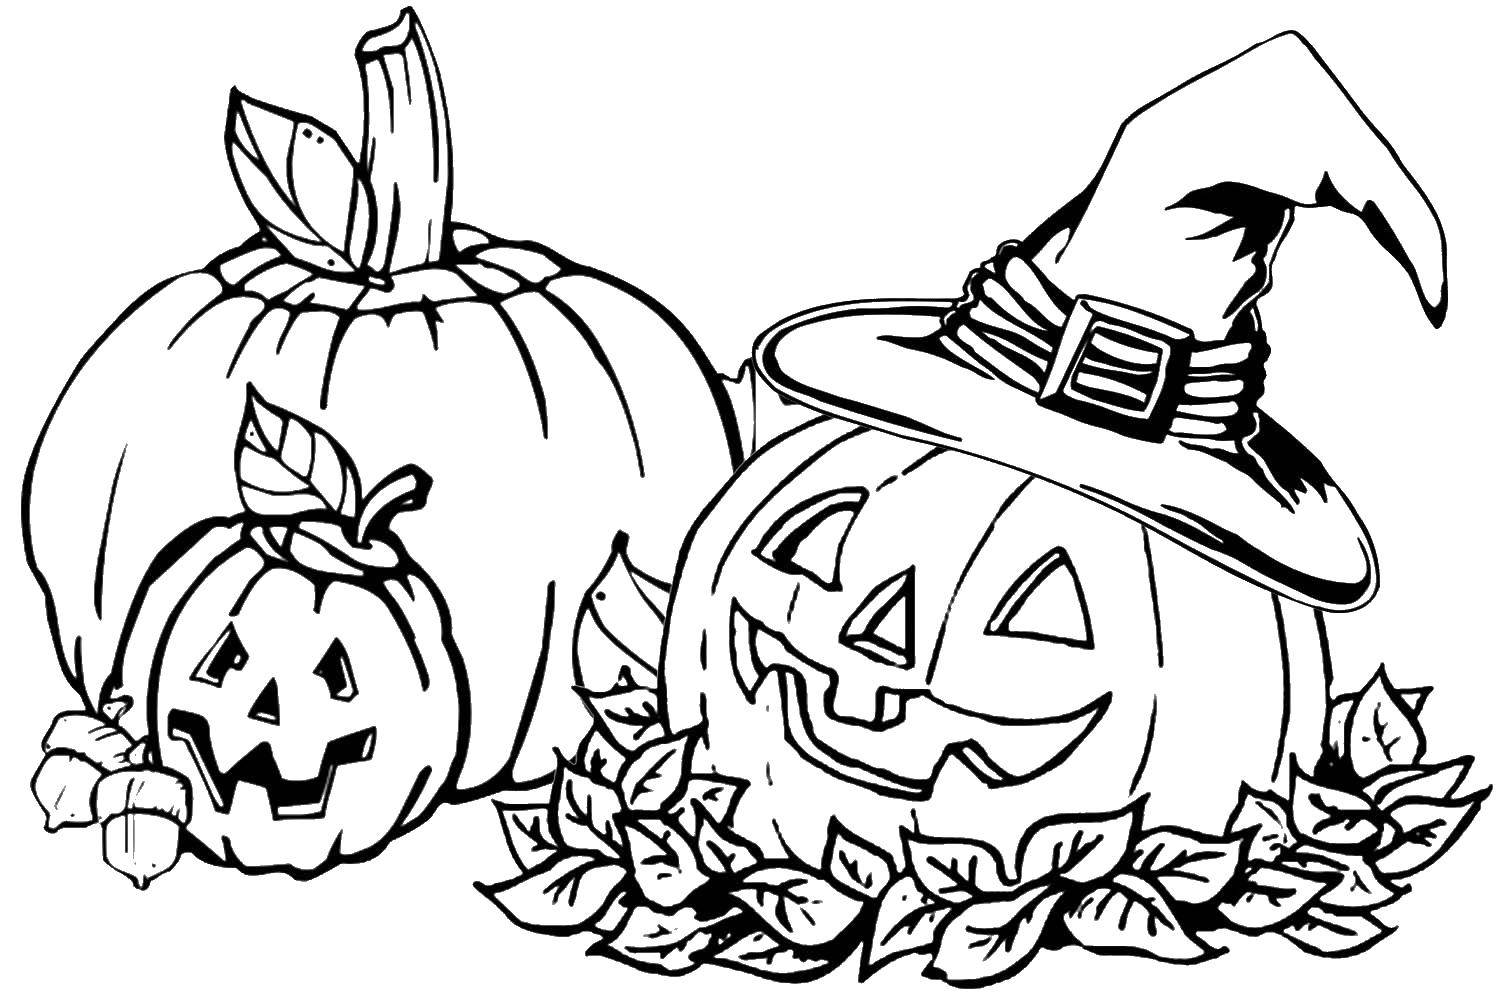 Coloring The hat on the pumpkin. Category Autumn. Tags:  Halloween, pumpkin.